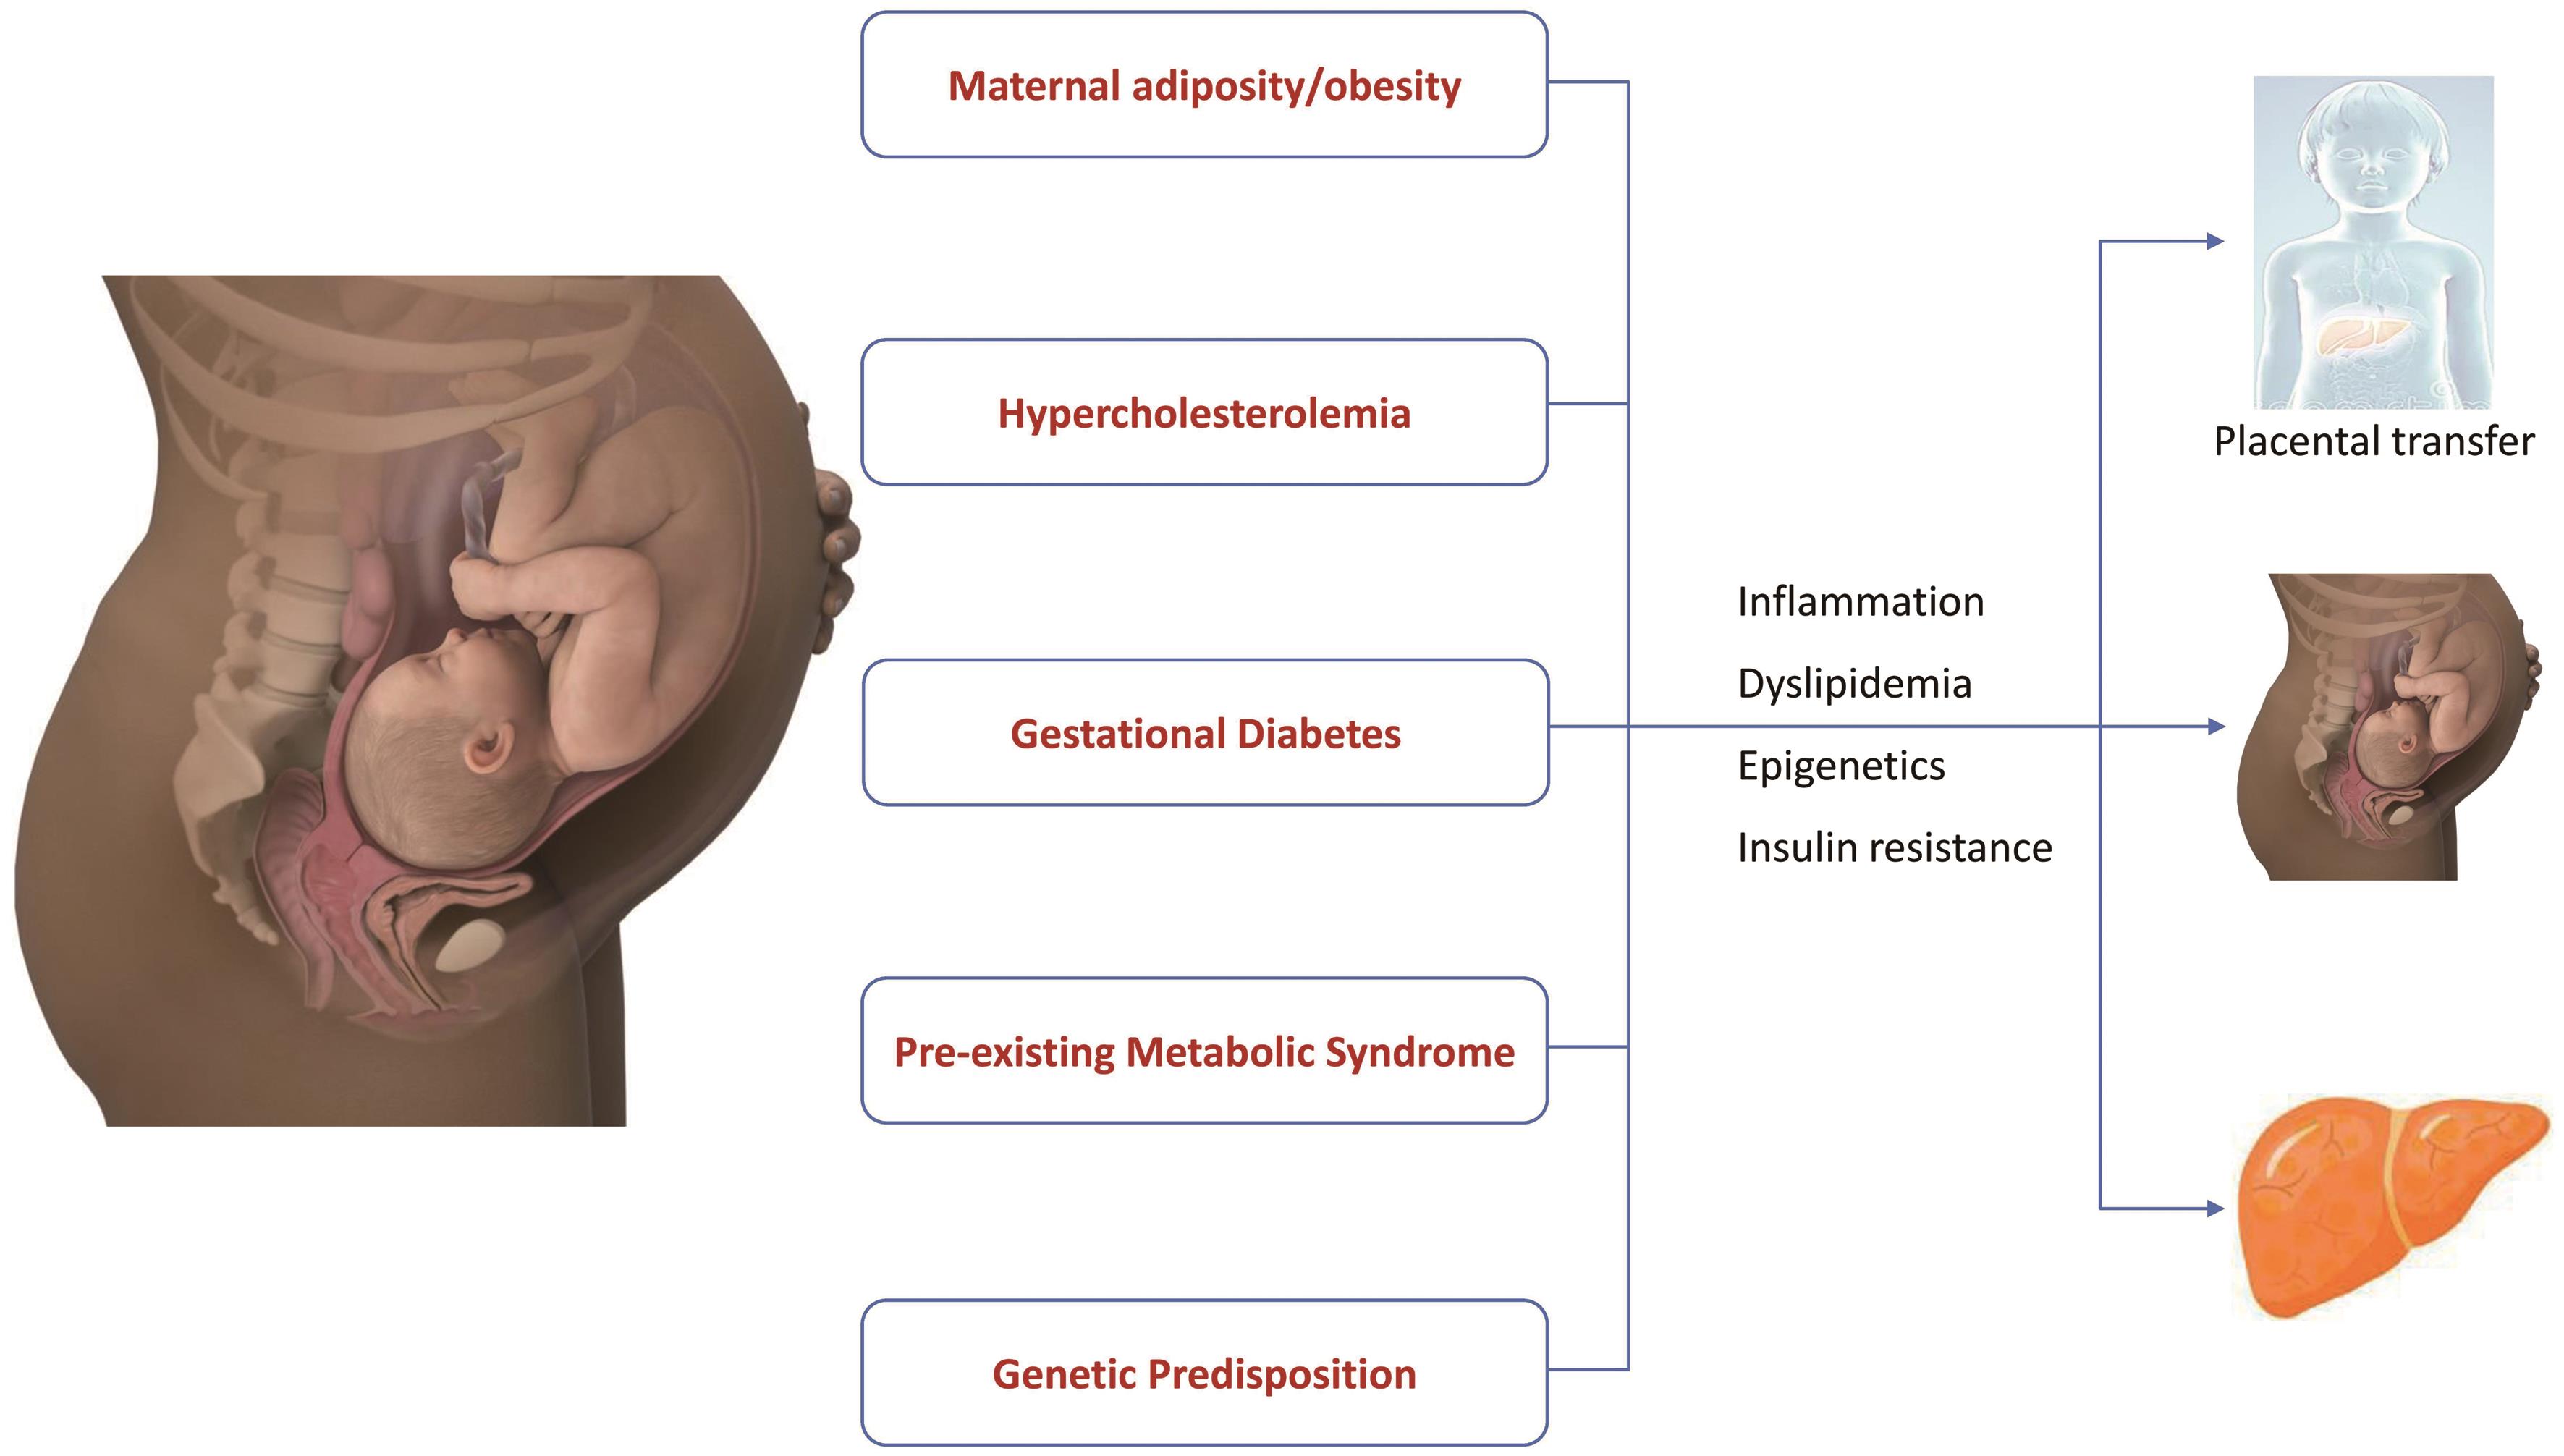 The effects of pregnancy on MAFLD development.